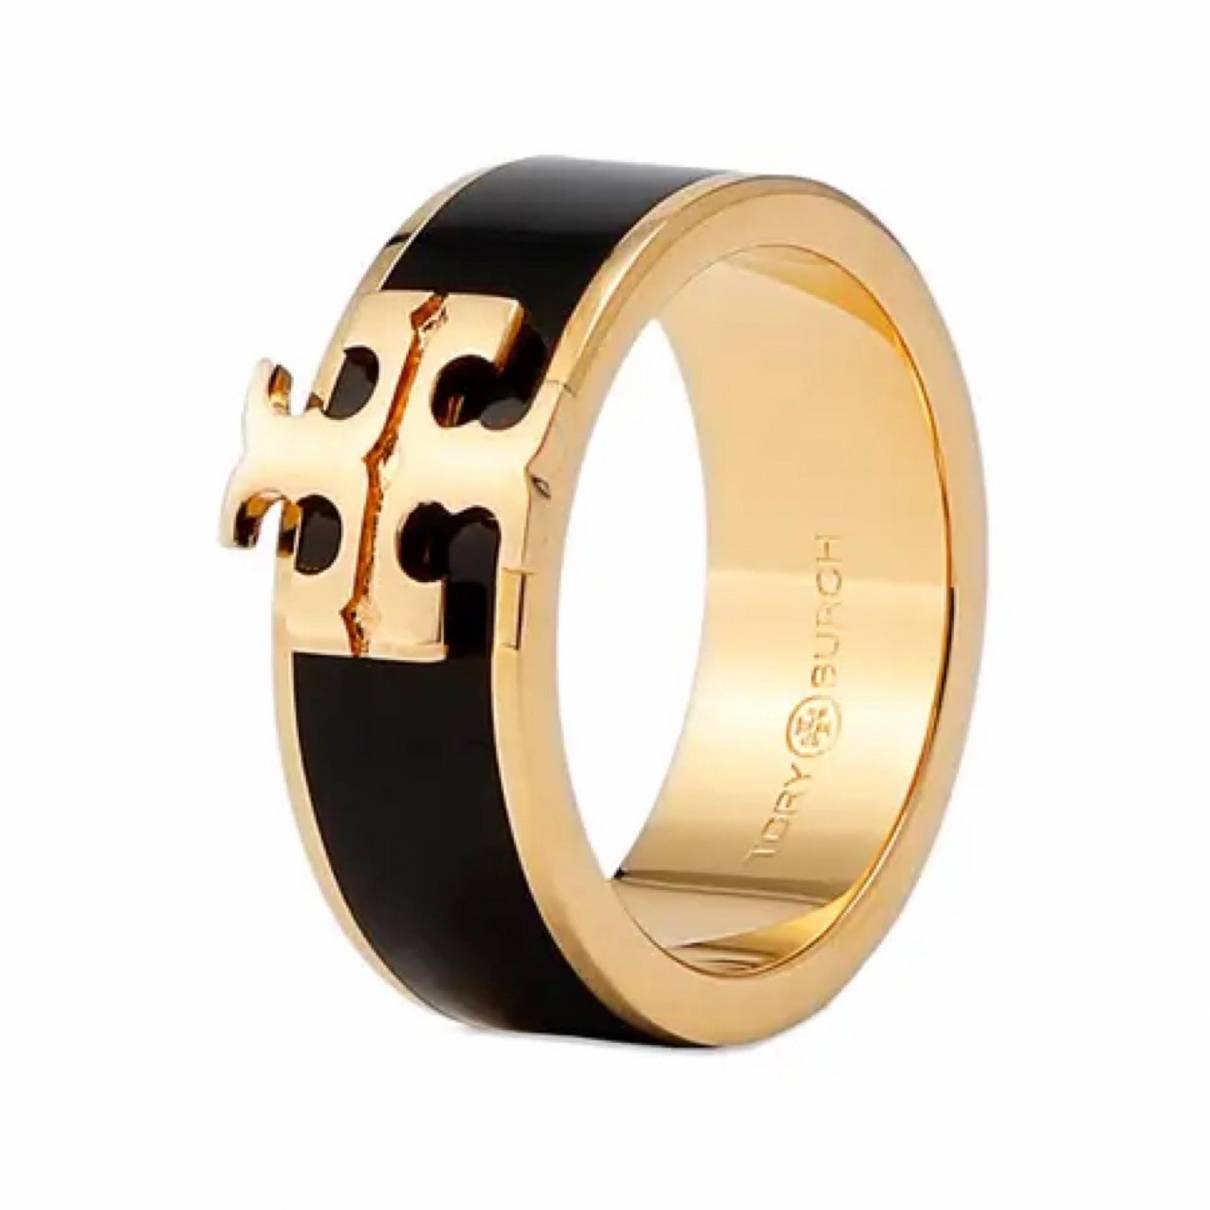 Ring Tory Burch Black size 7 ¼ US in Other - 24979842